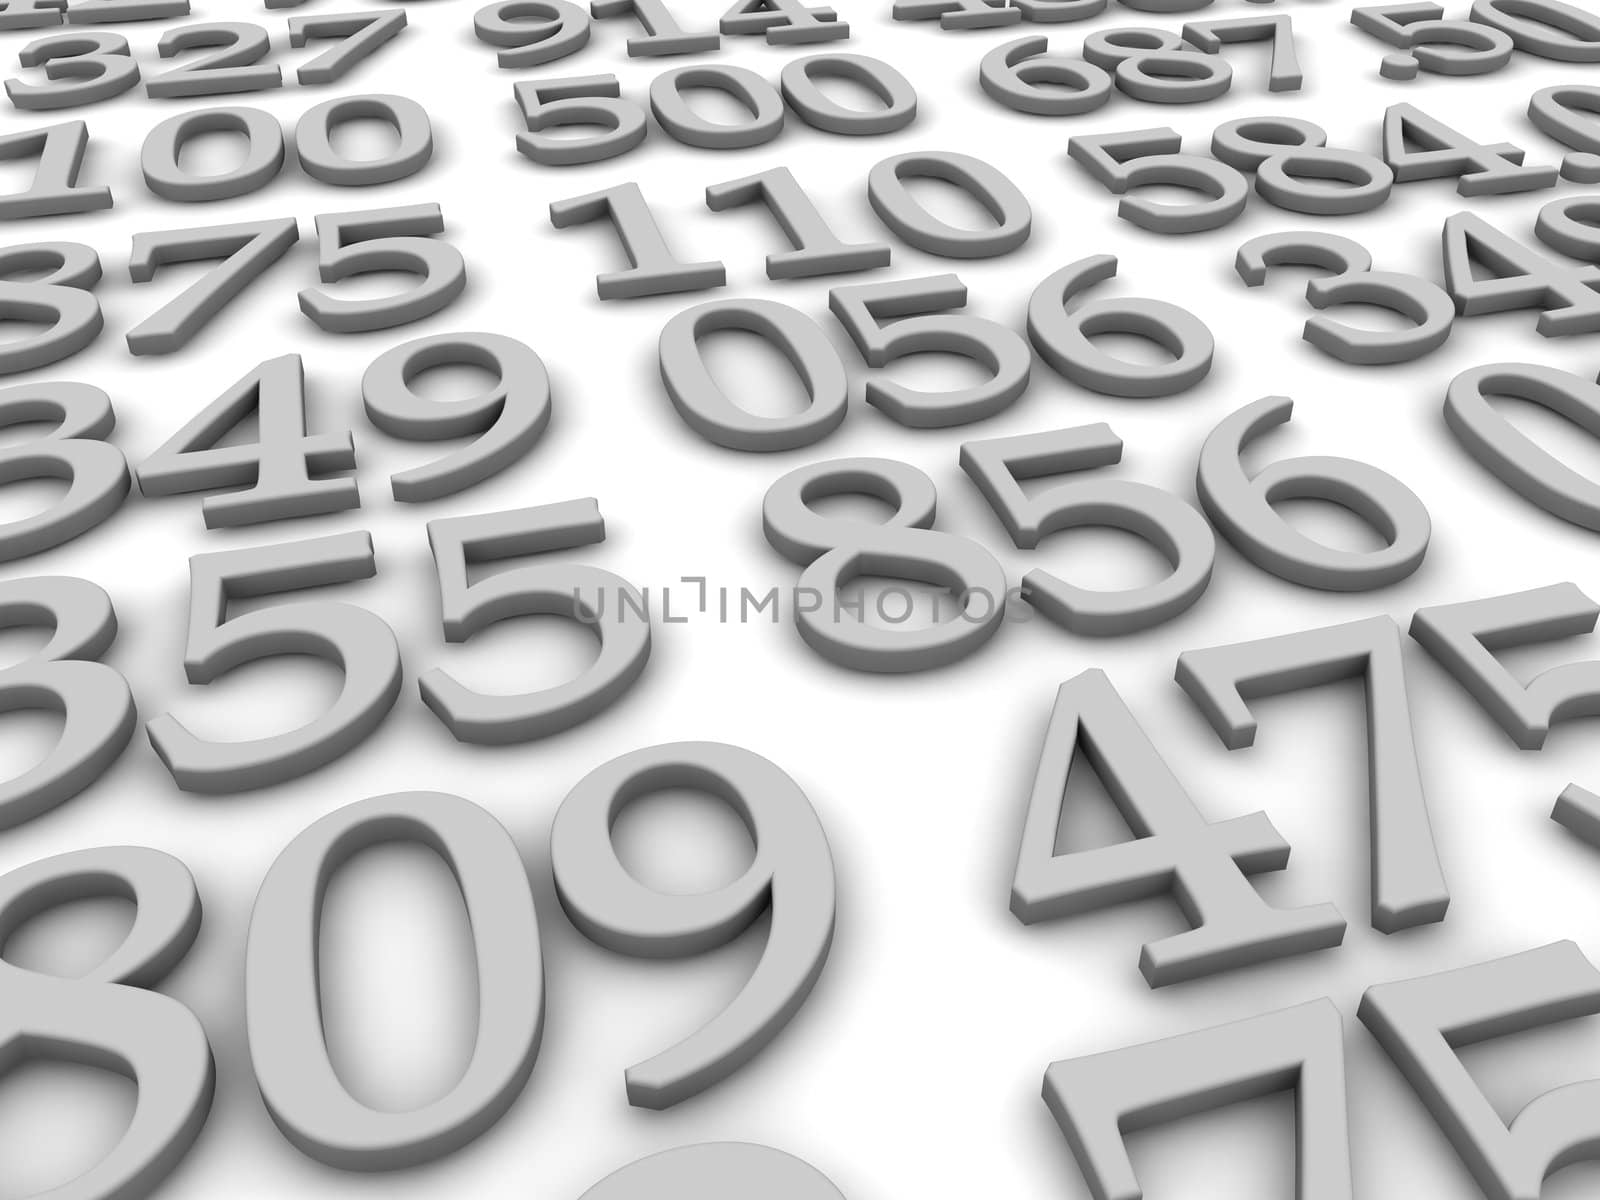 Black and white numbers background. 3d rendered illustration